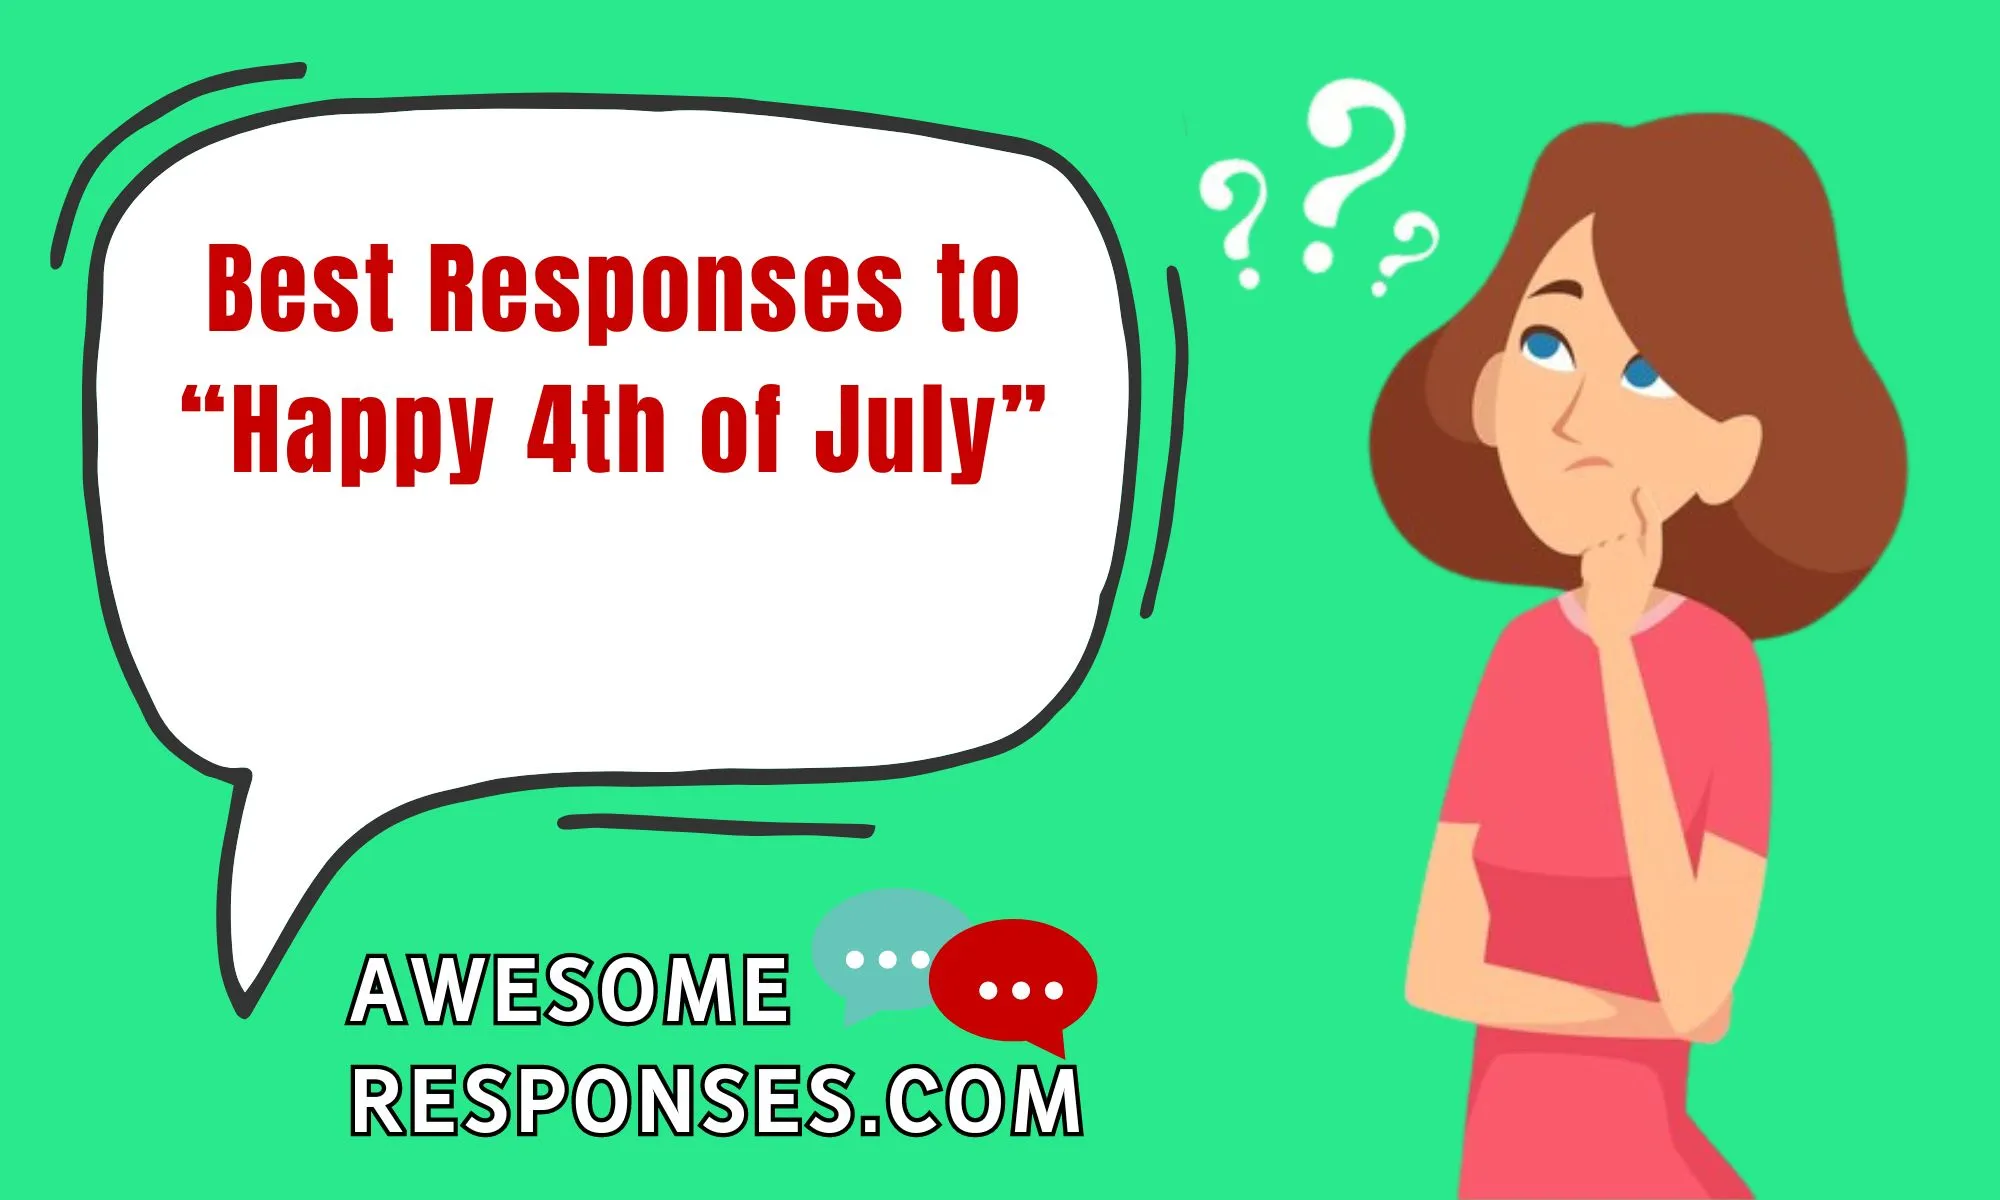 Best Responses to “Happy 4th of July”